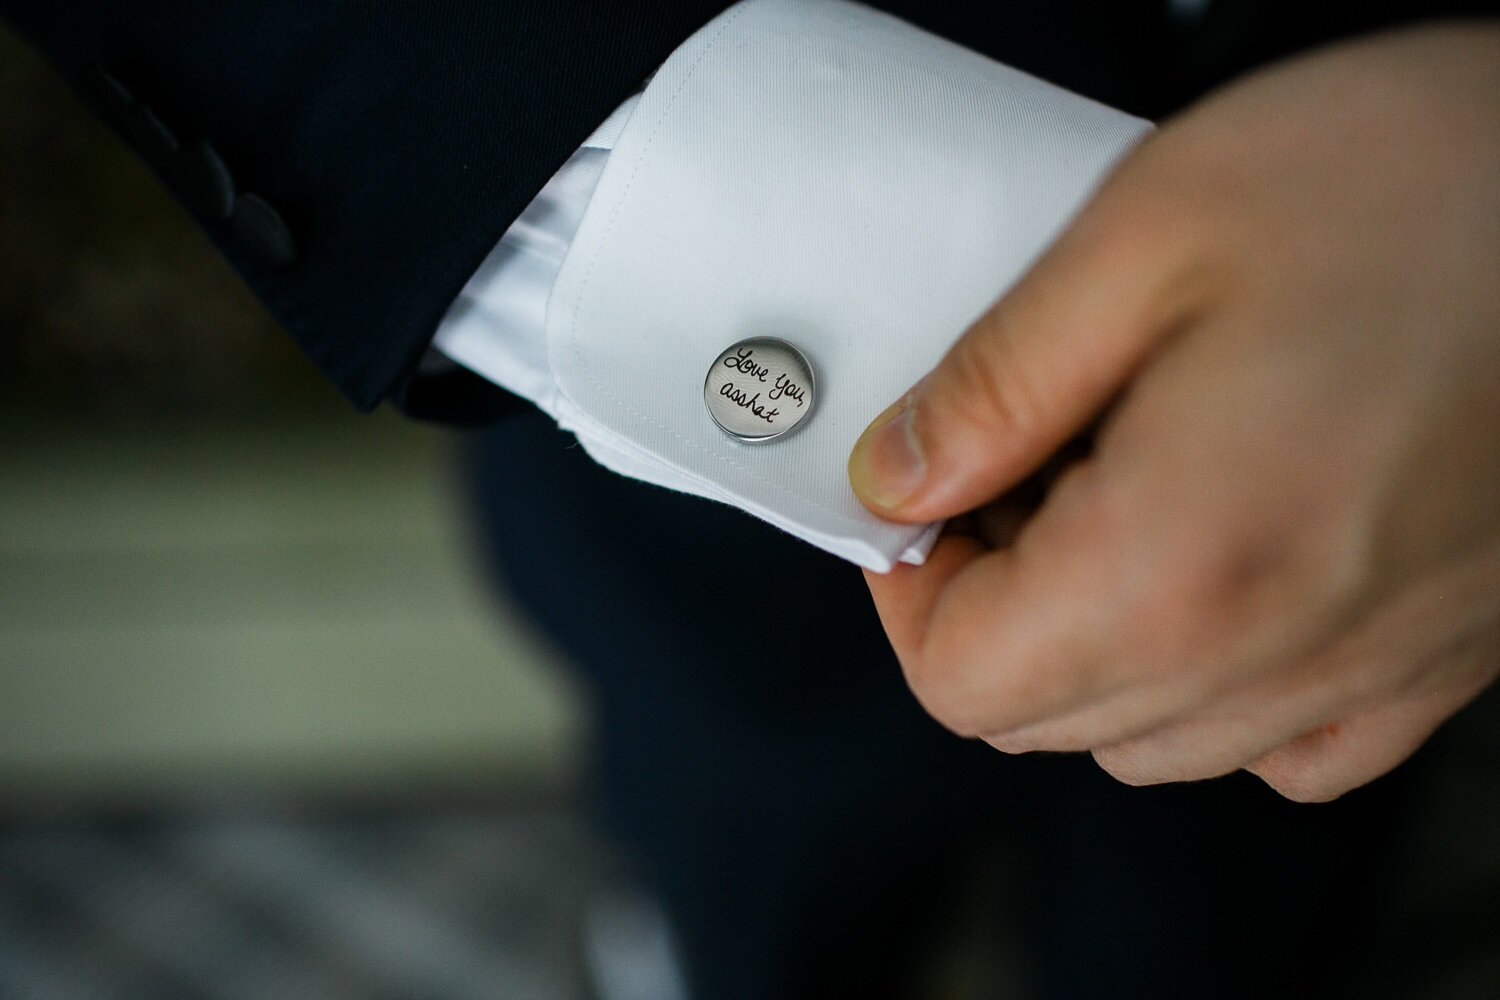 17_Cufflink gift for groom at Whitby Castle wedding in Rye NY.jpg